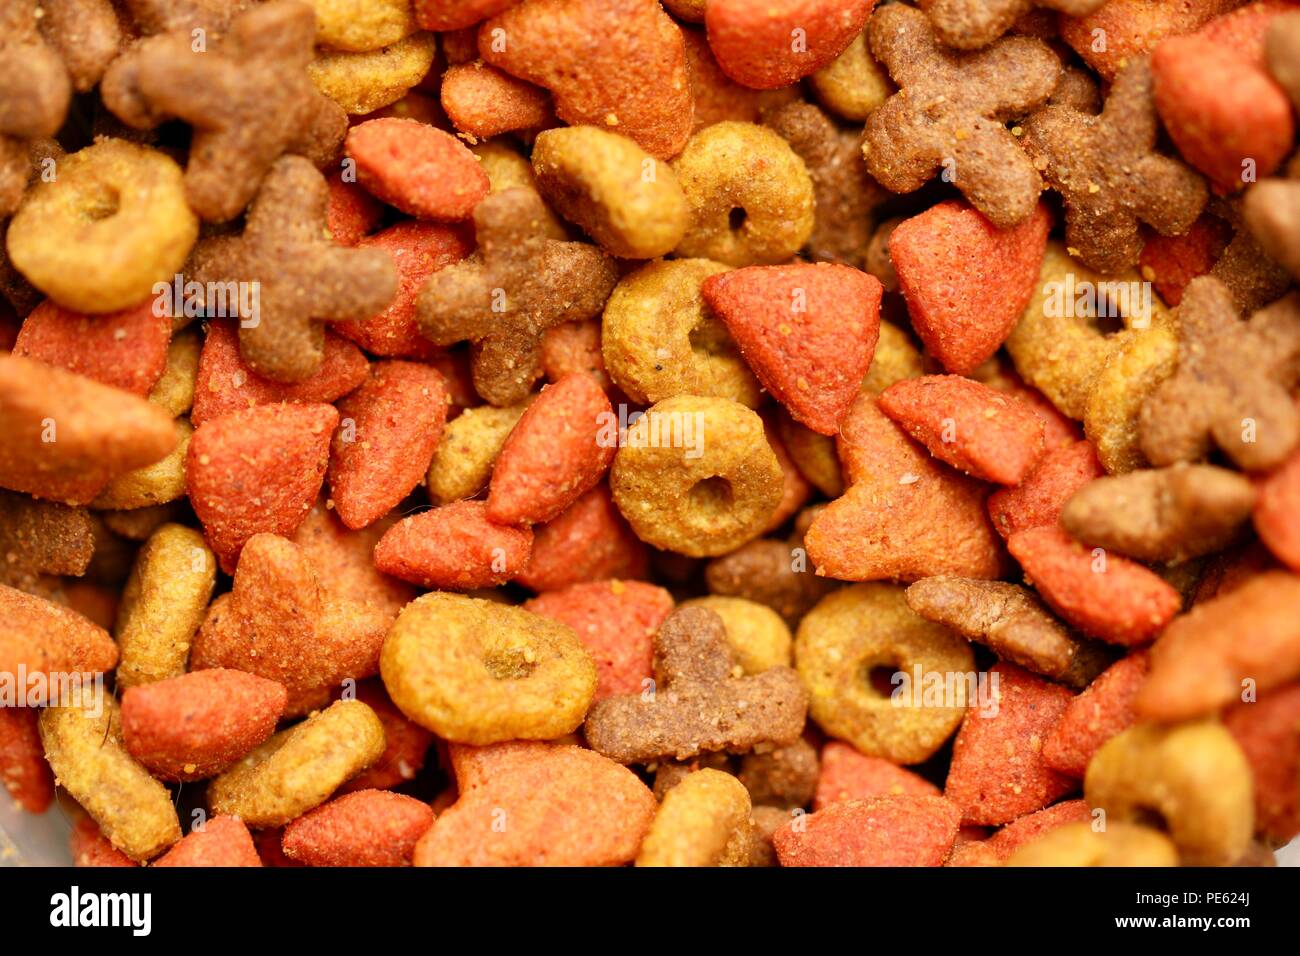 Colorful, tasty, and healty food for your pet Stock Photo